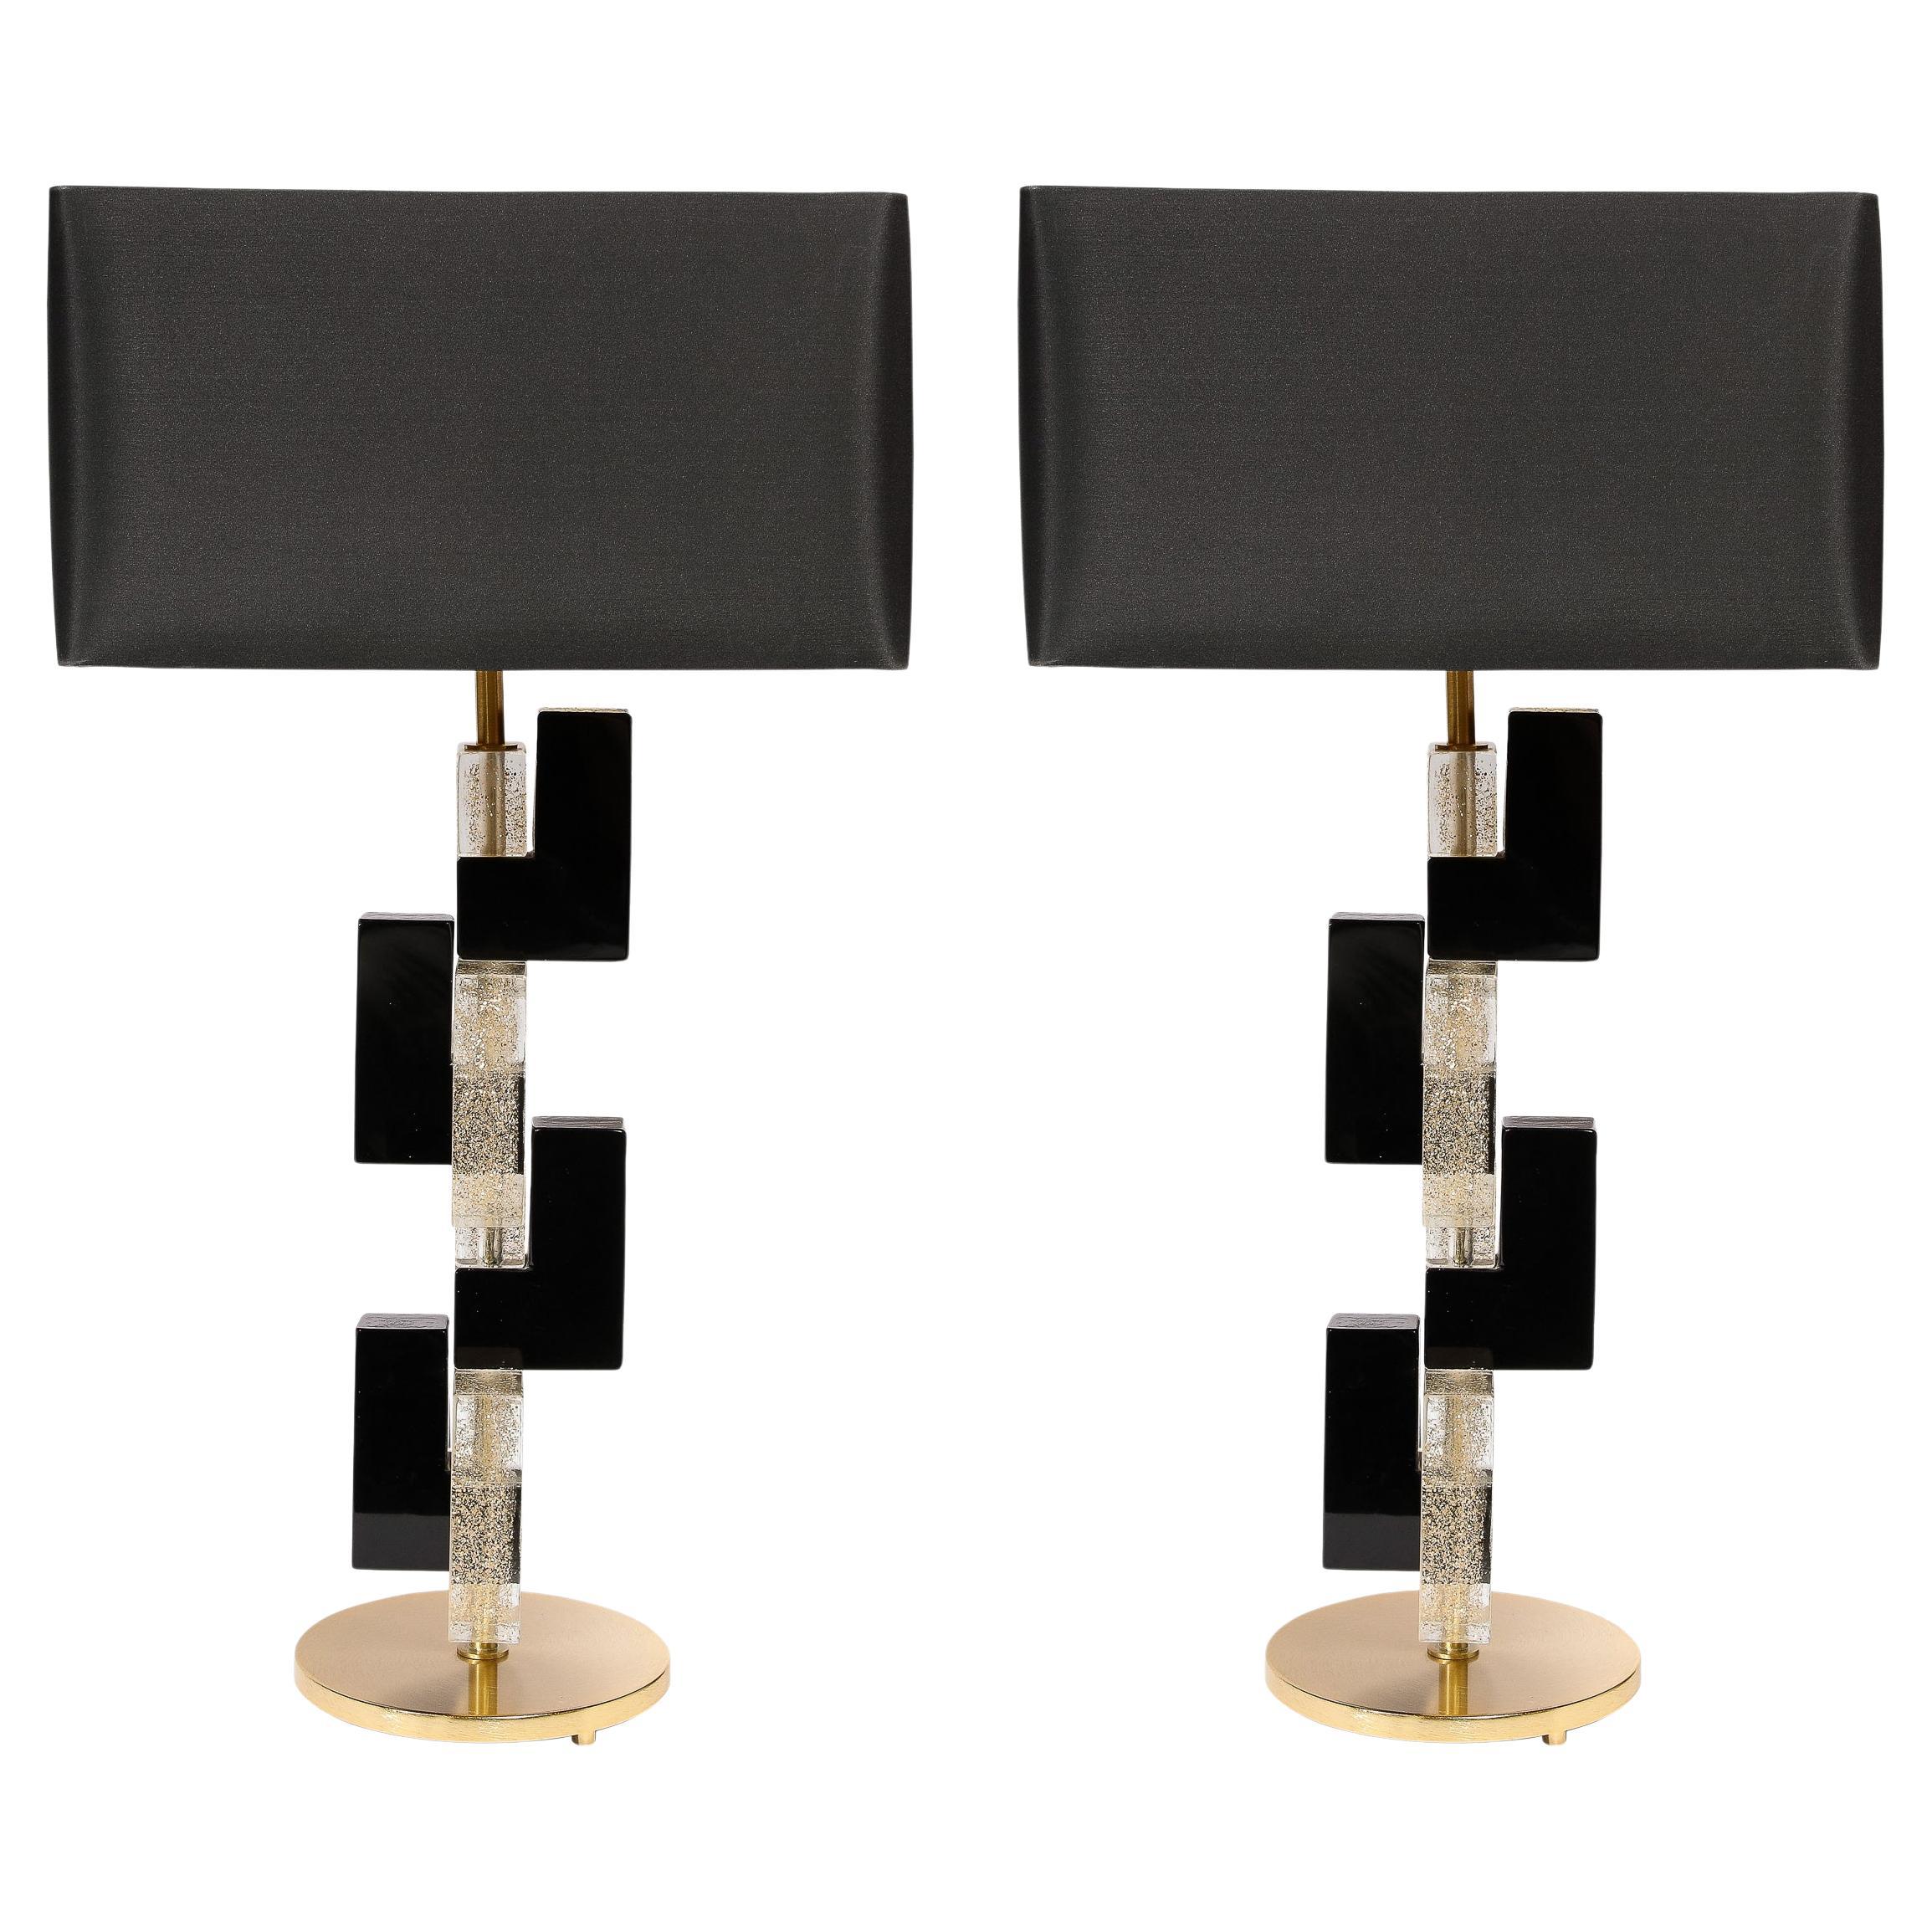 Modernist Hand-Blown Murano Rectilinear Table Lamps in Black & Translucent Glass For Sale